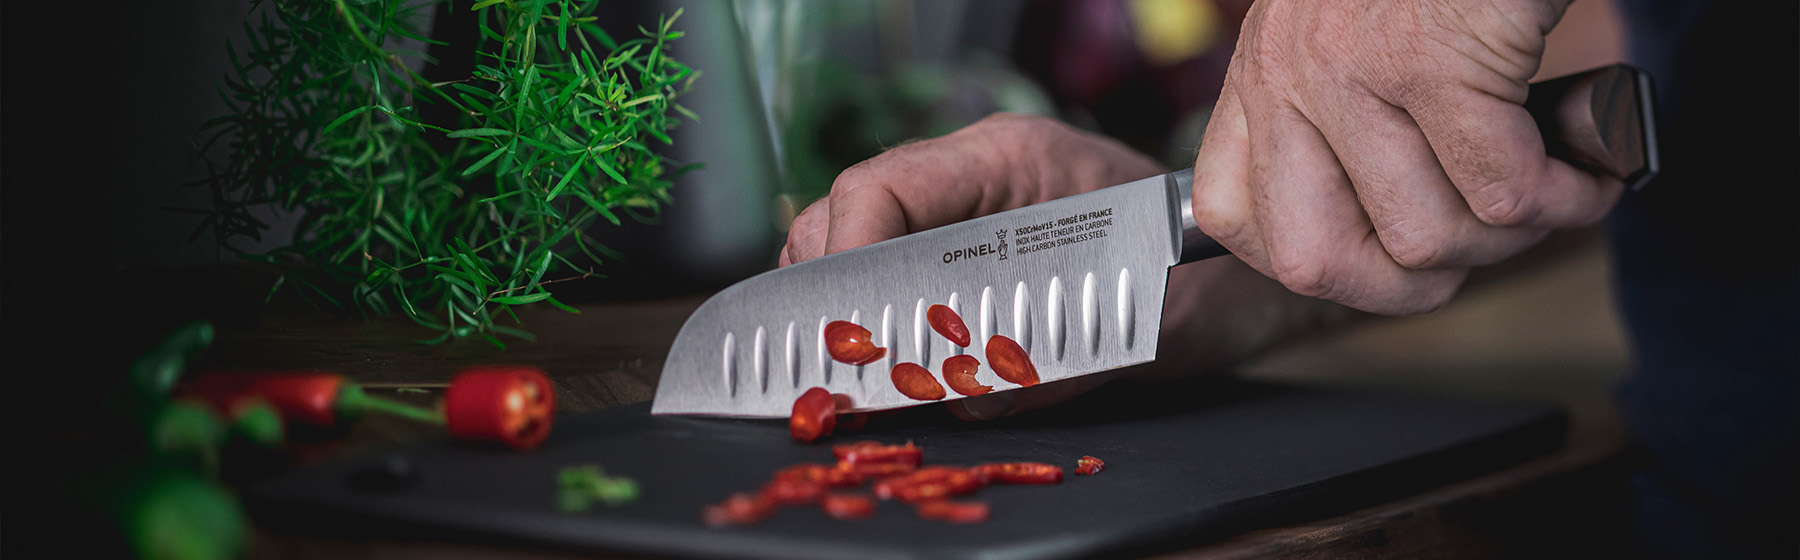 Essential Knives for Home Cooks from Chef's Knives to Cleavers